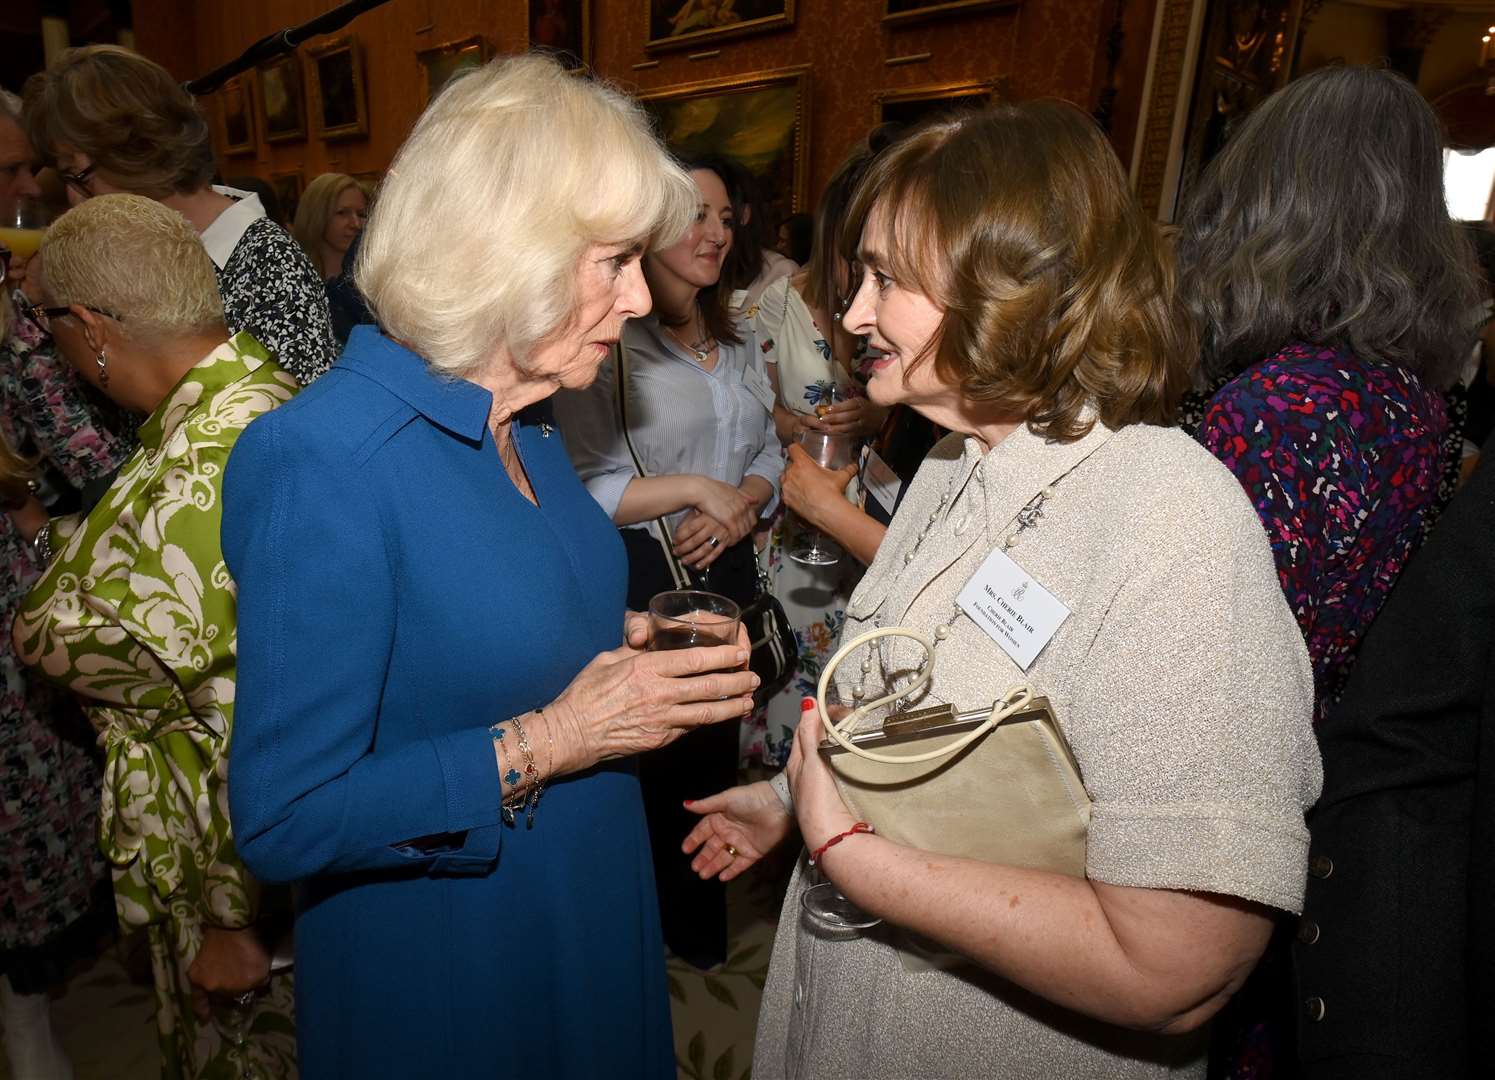 Camilla speaks to Cherie Blair at the reception (Eamonn M McCormack/PA)